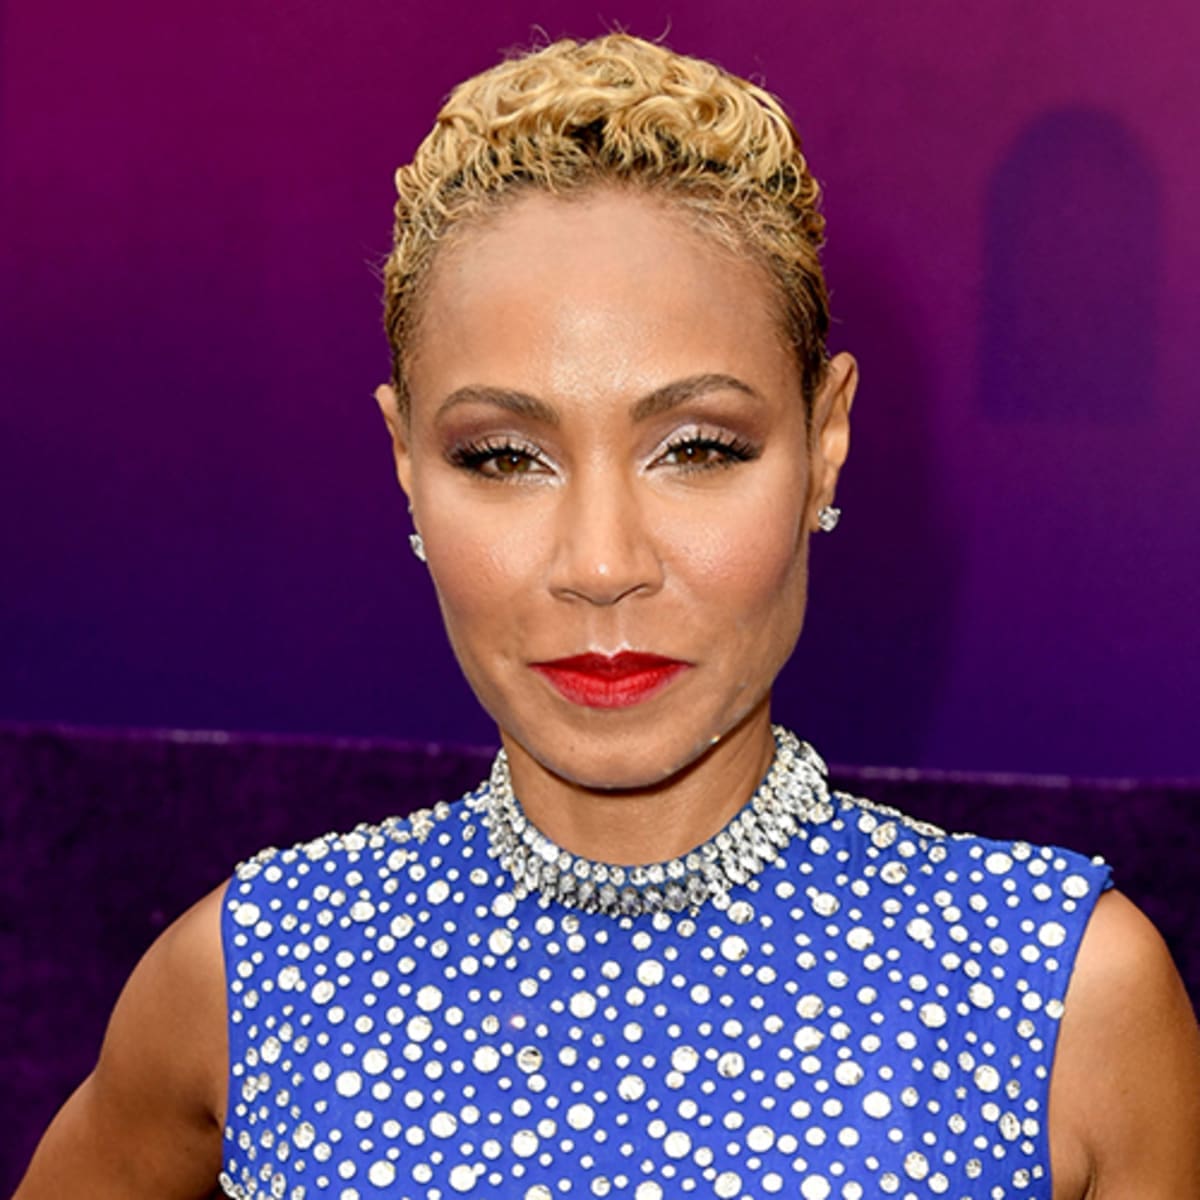 ”jada-pinkett-smith-releases-statement-about-her-family-following-the-oscars-event”